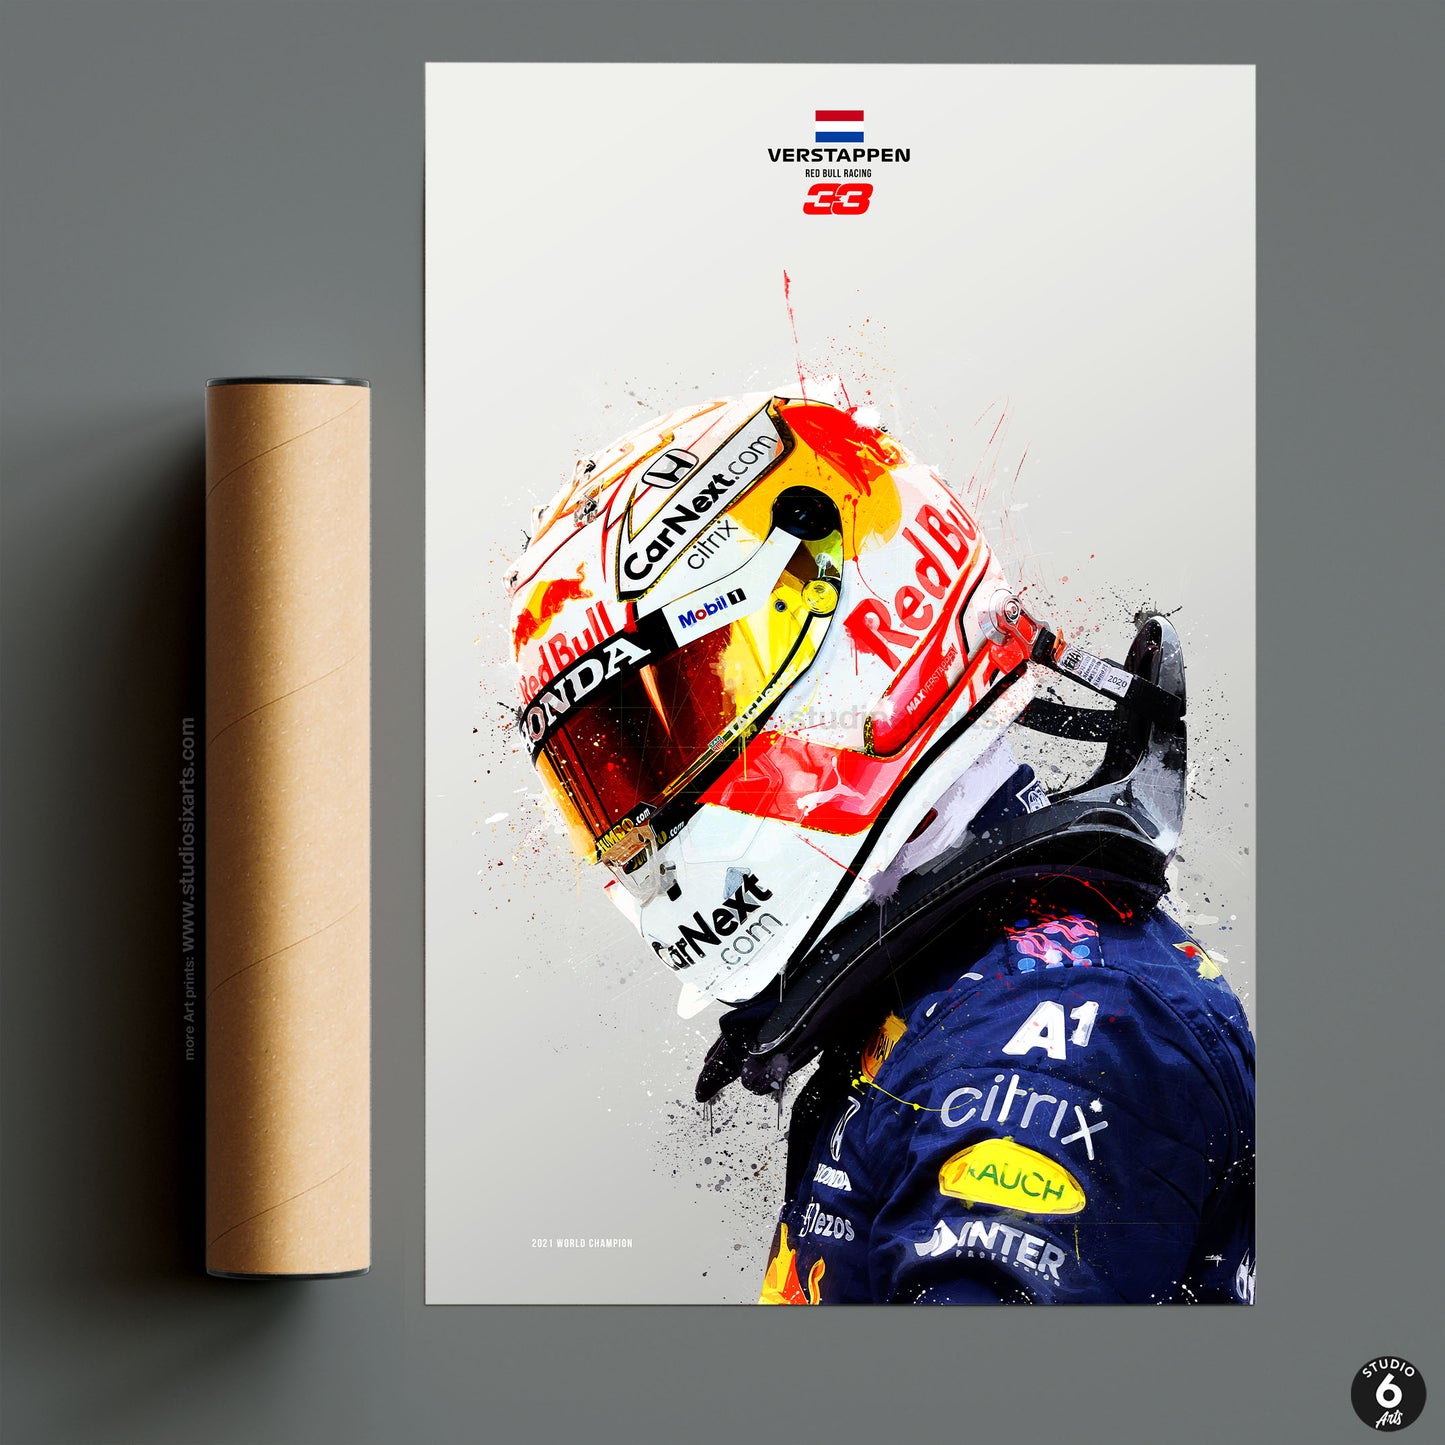 Max Verstappen 2021 Poster and Canvas, RB16 F1 Decor, F1 Print